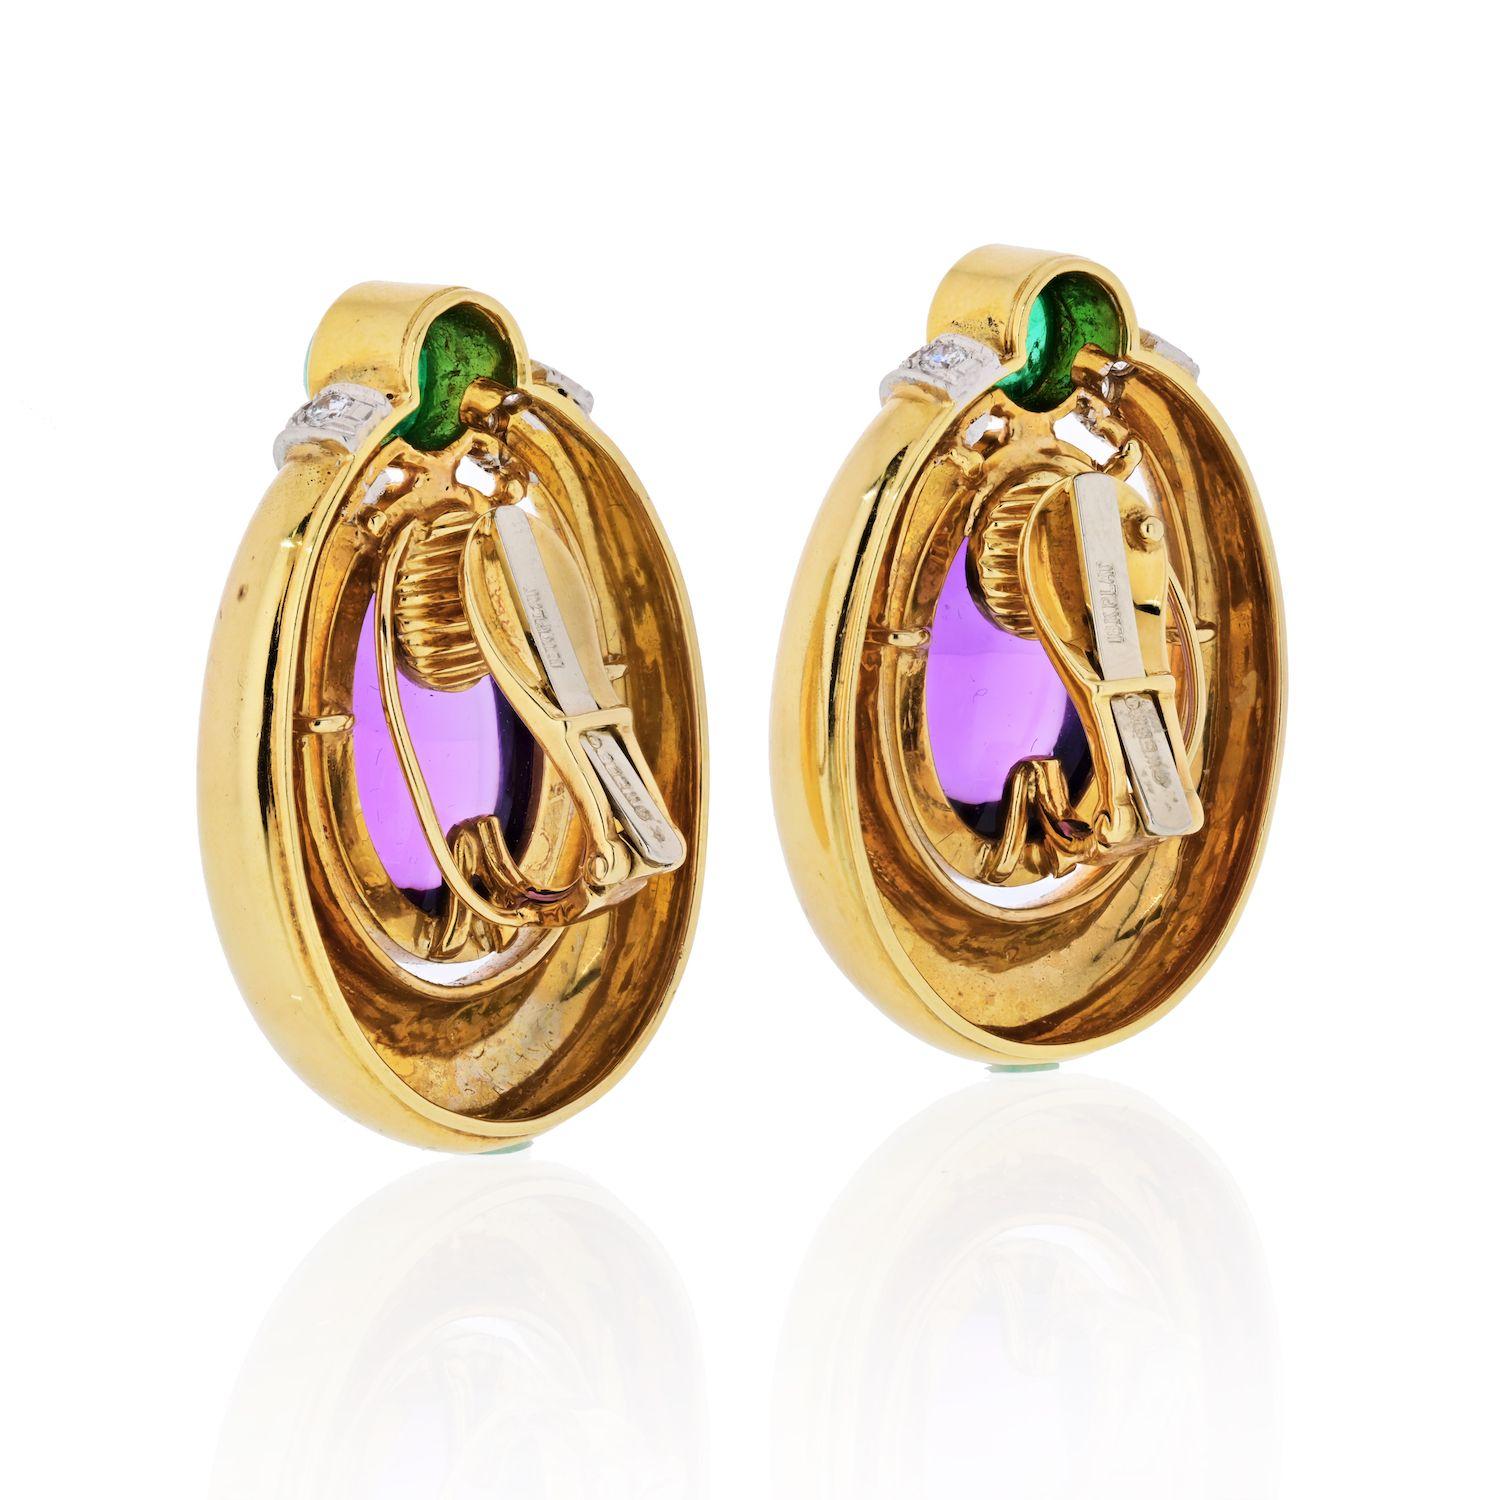 Impressive vintage gold clip earrings by David Webb mounted with cabochon amethysts, emeralds, and pave round cut diamonds. High polished yellow gold door knocker attached to the frame. 
Length: 39mm
Width: 30mm
Clip-on style.
